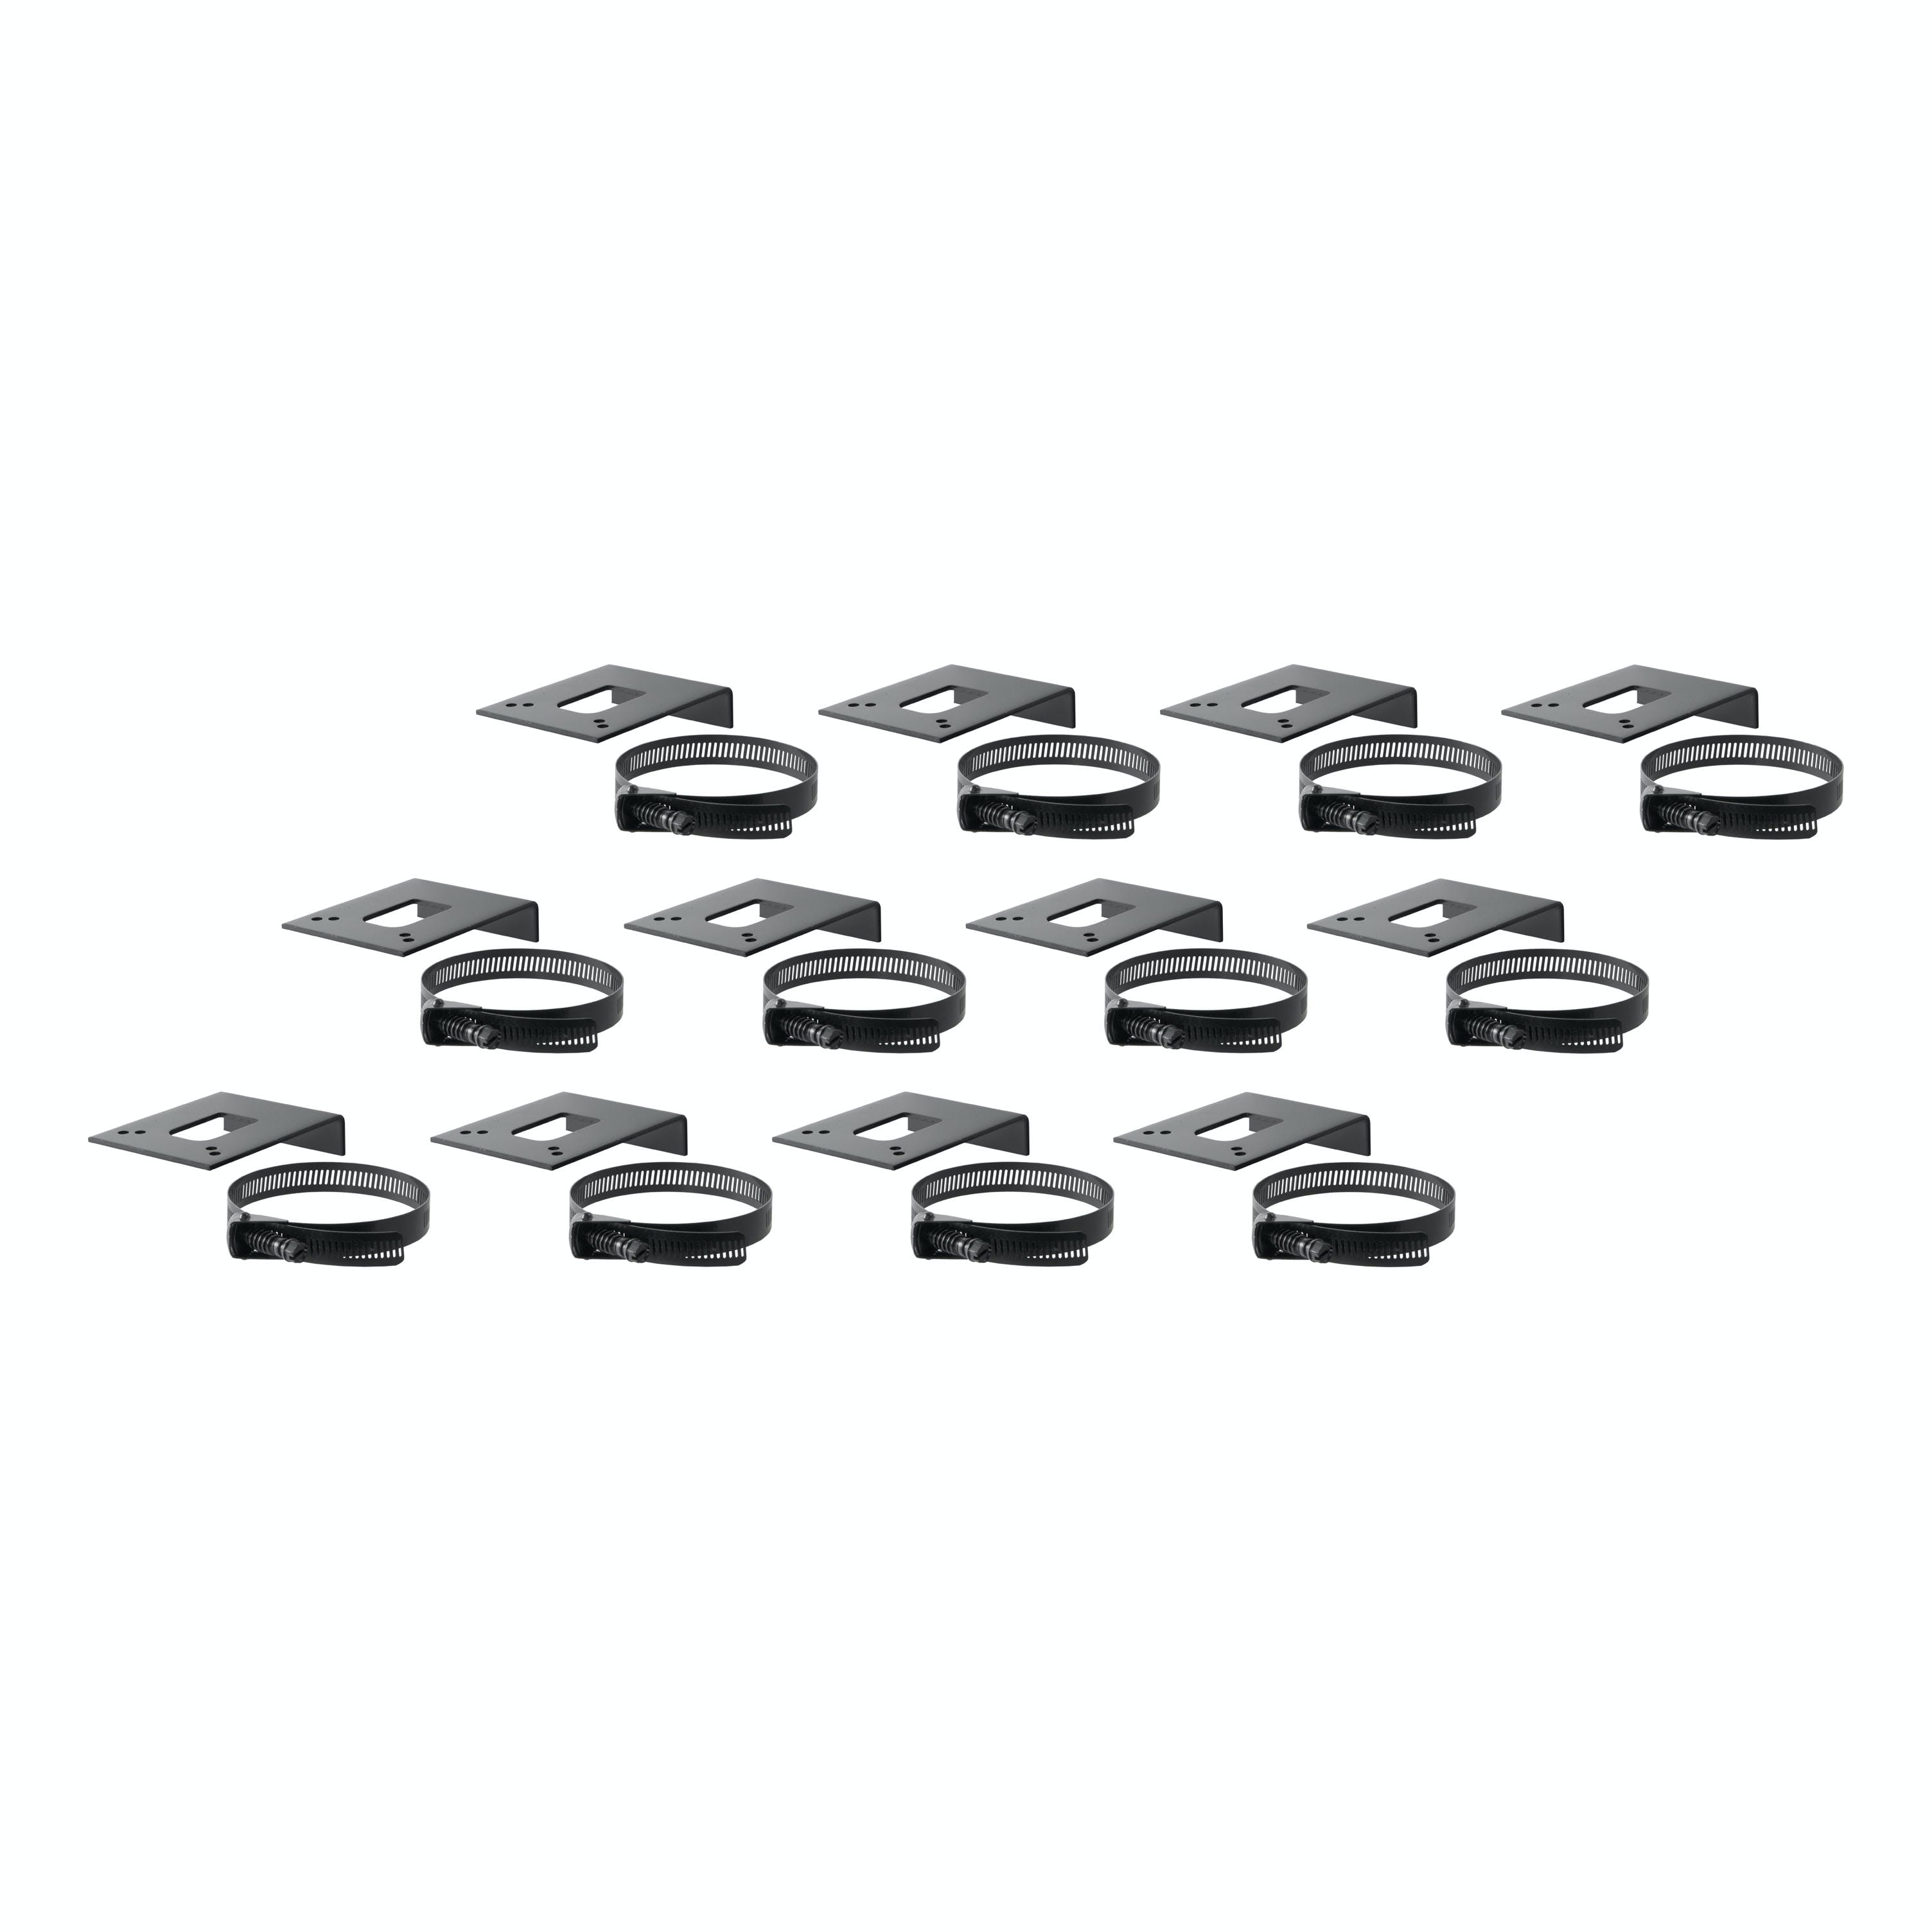 CURT 57203 Connector Bracket Mounts for 4, 5 and 6-Way Brackets (12-Pack)